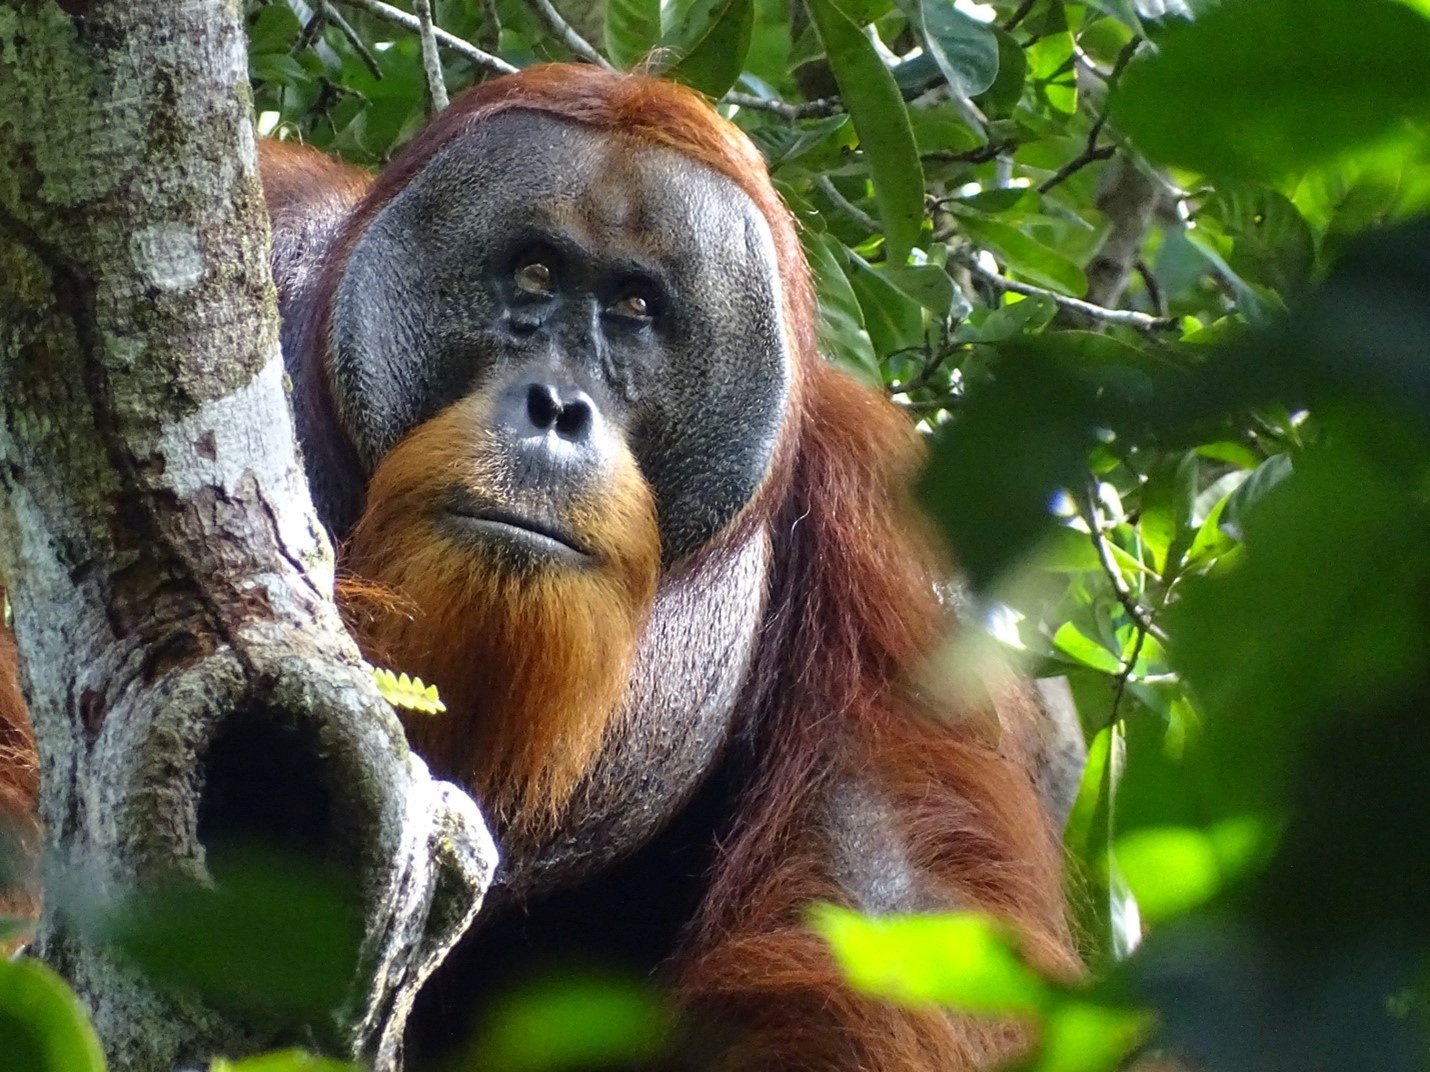 Rakus, a Sumatran orangutan, is seen two months after he started treating himself with a medicinal plant at a protected rainforest area in Indonesia. Photo:Safruddin/Max Planck Institute of Animal Behaviour via Reuters